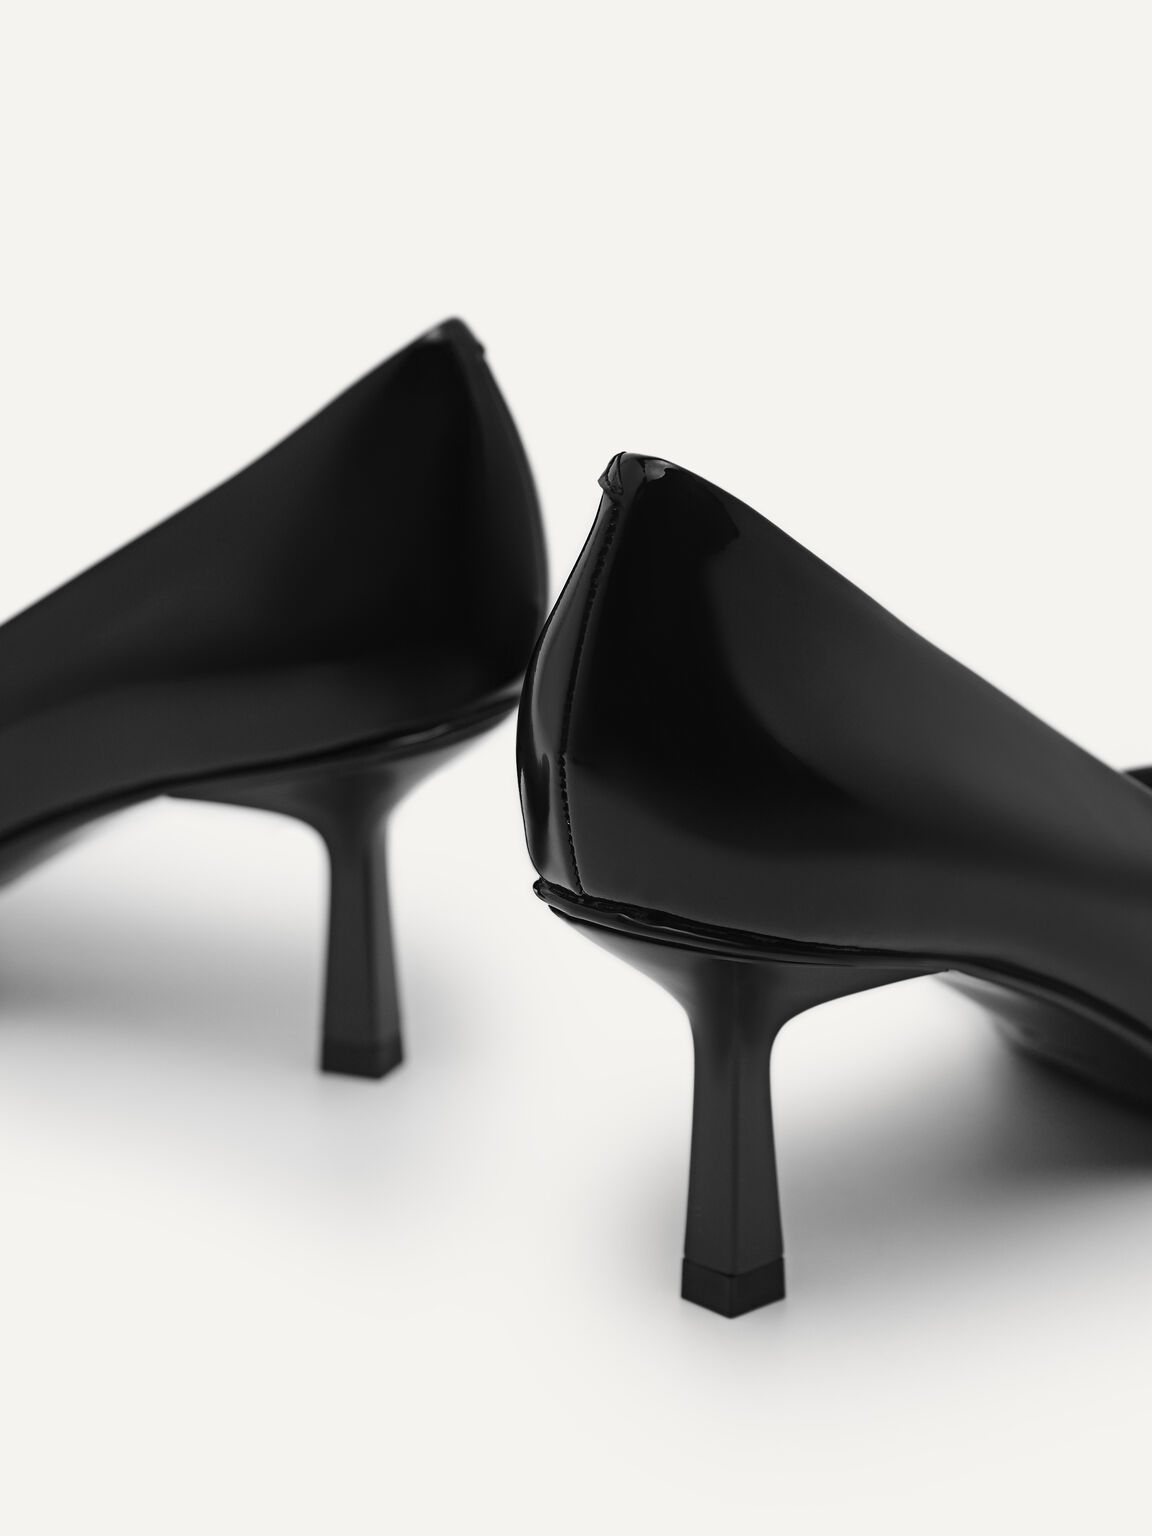 Patent Leather Pointed Pumps, Black